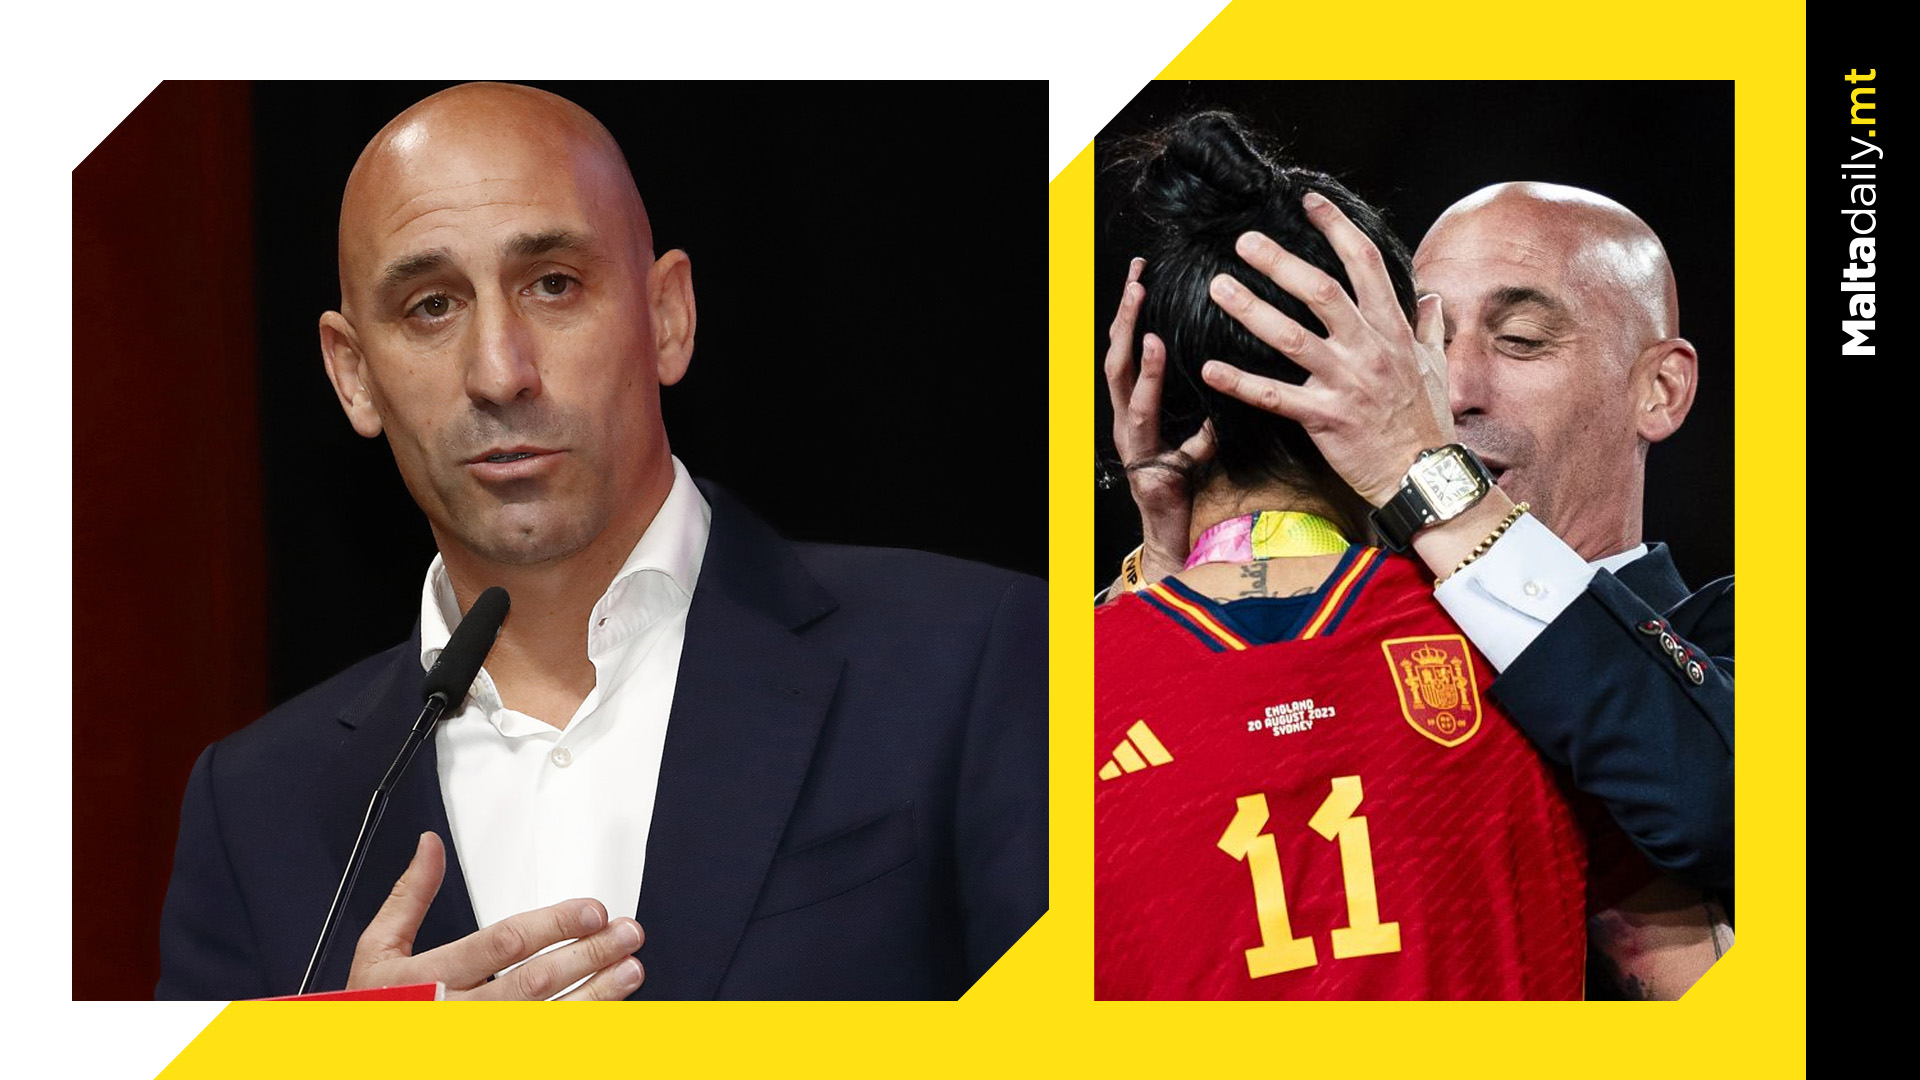 Controversial World Cup Kiss was 'Affectionate Mutual Gesture', Spanish Coach Says